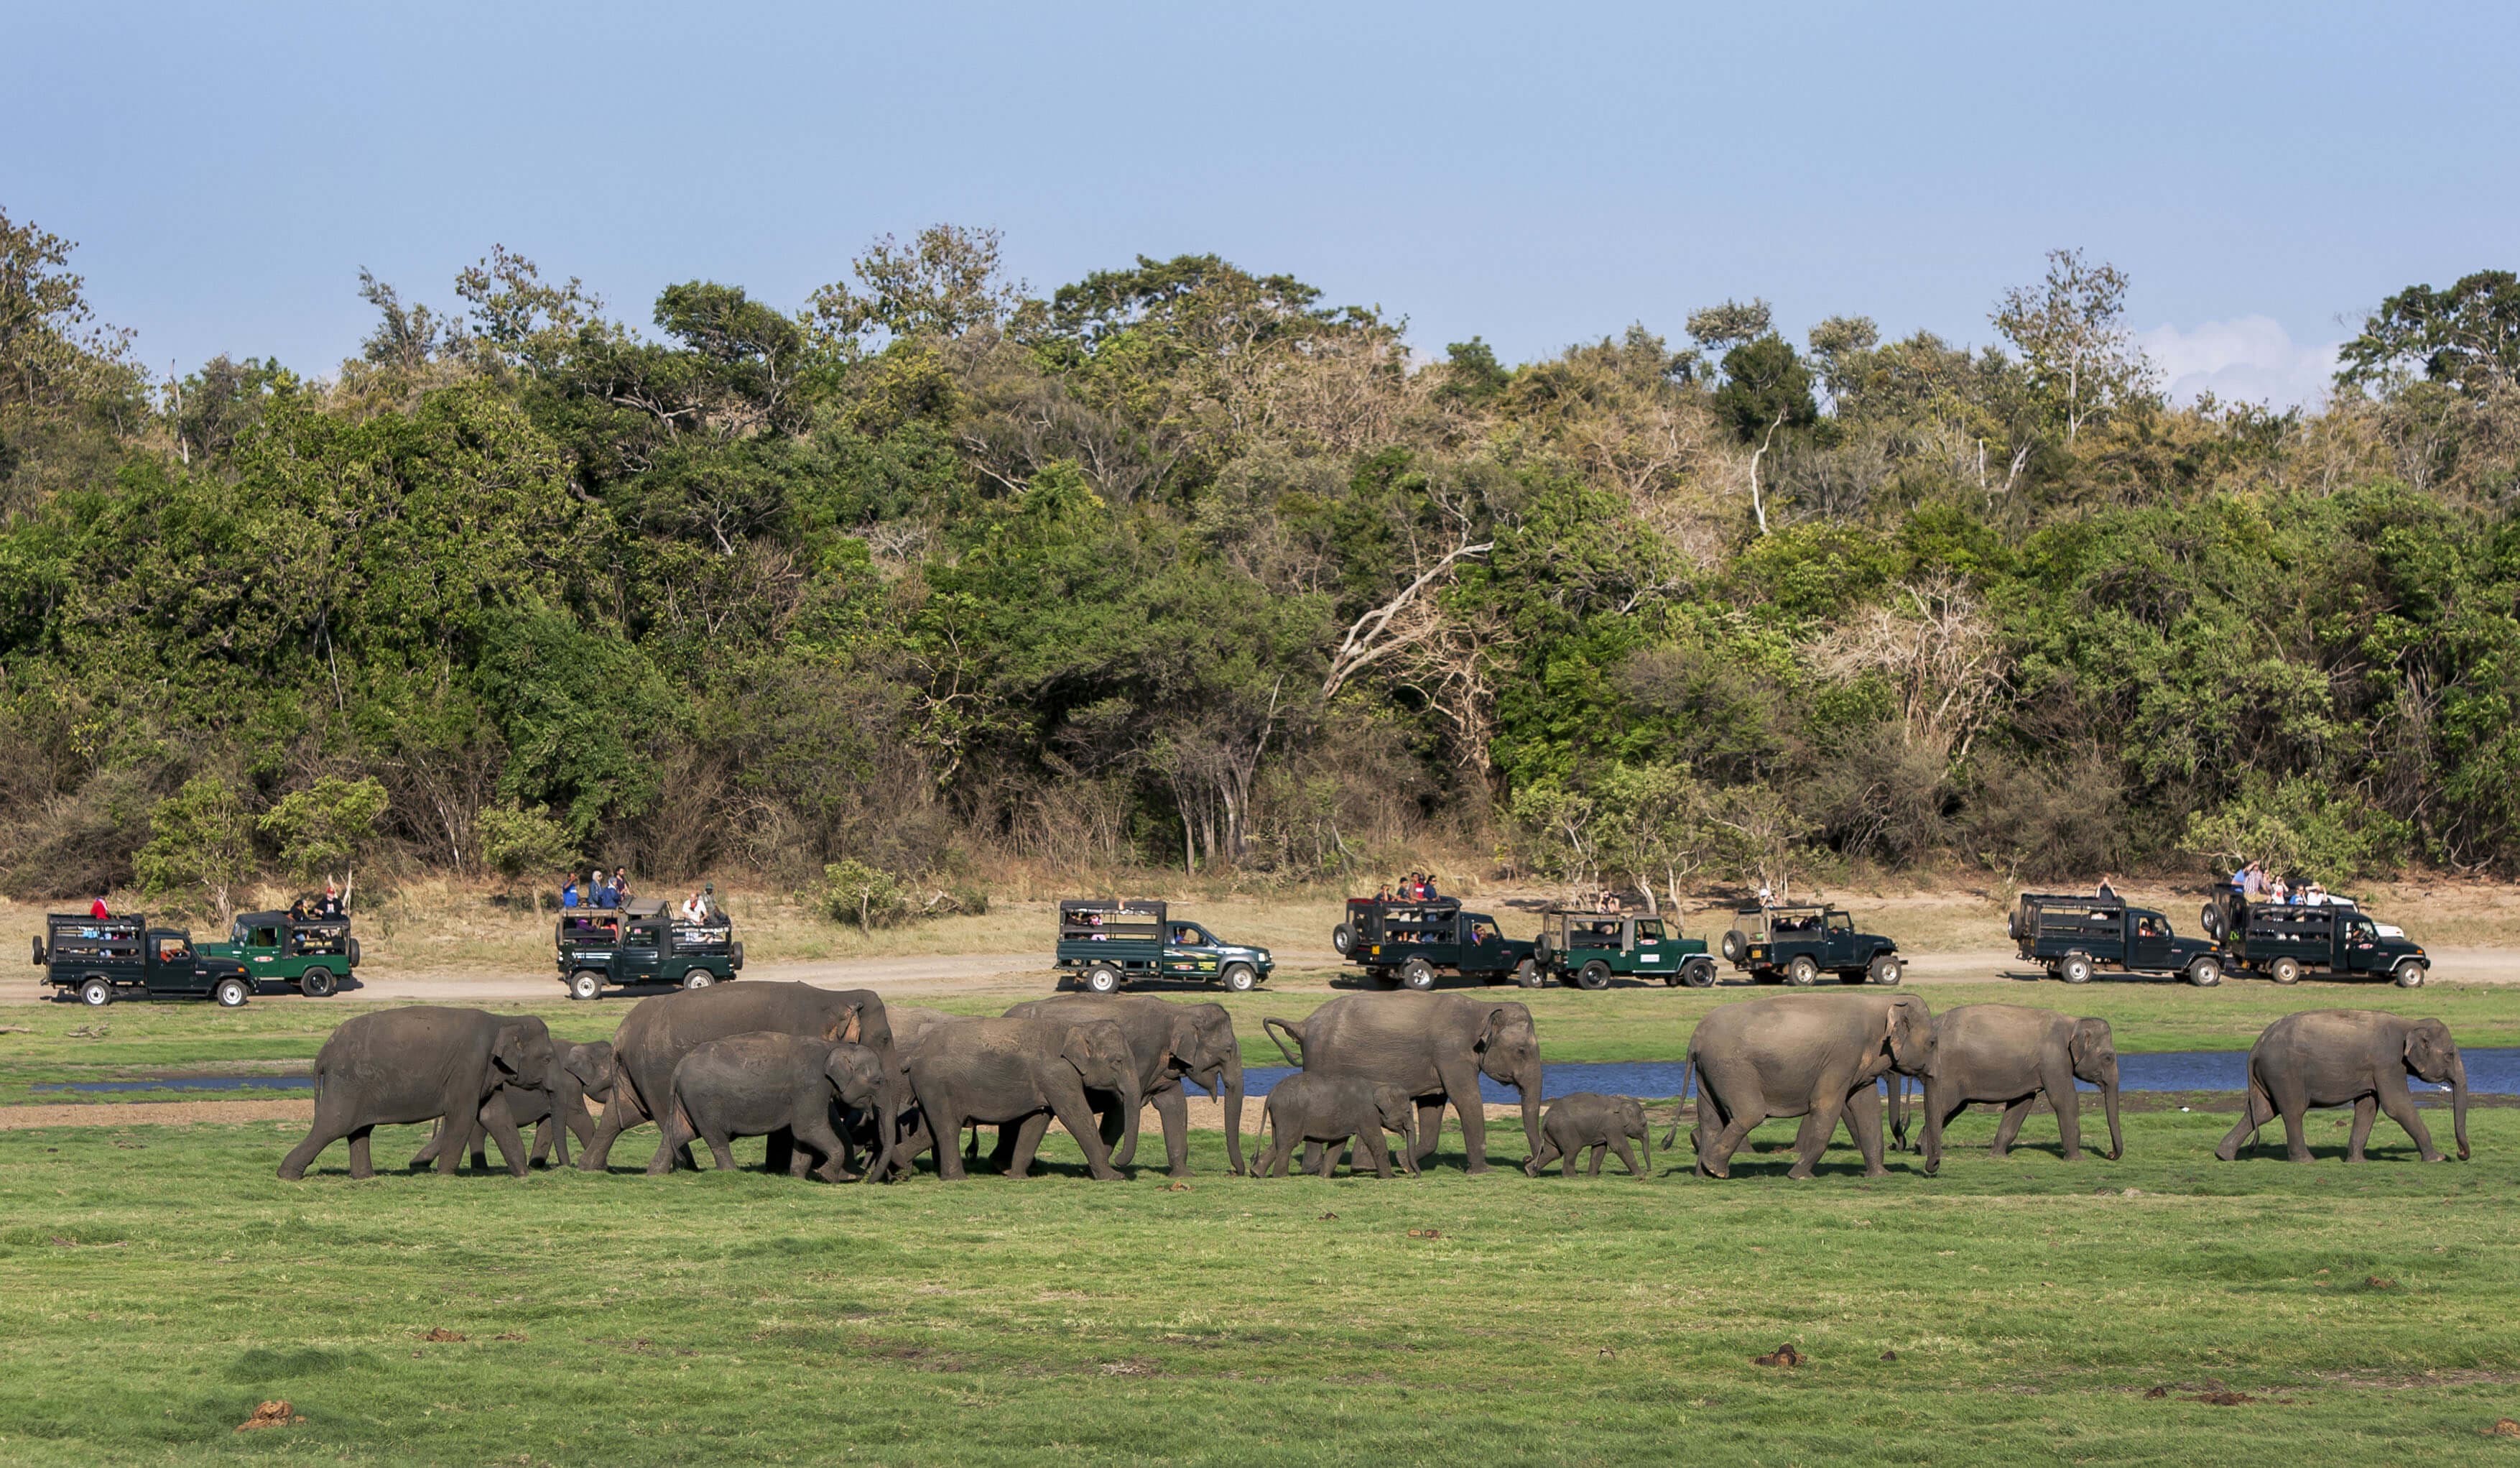 Beautiful Scenery of a group of elephants in Wilpattu National Park